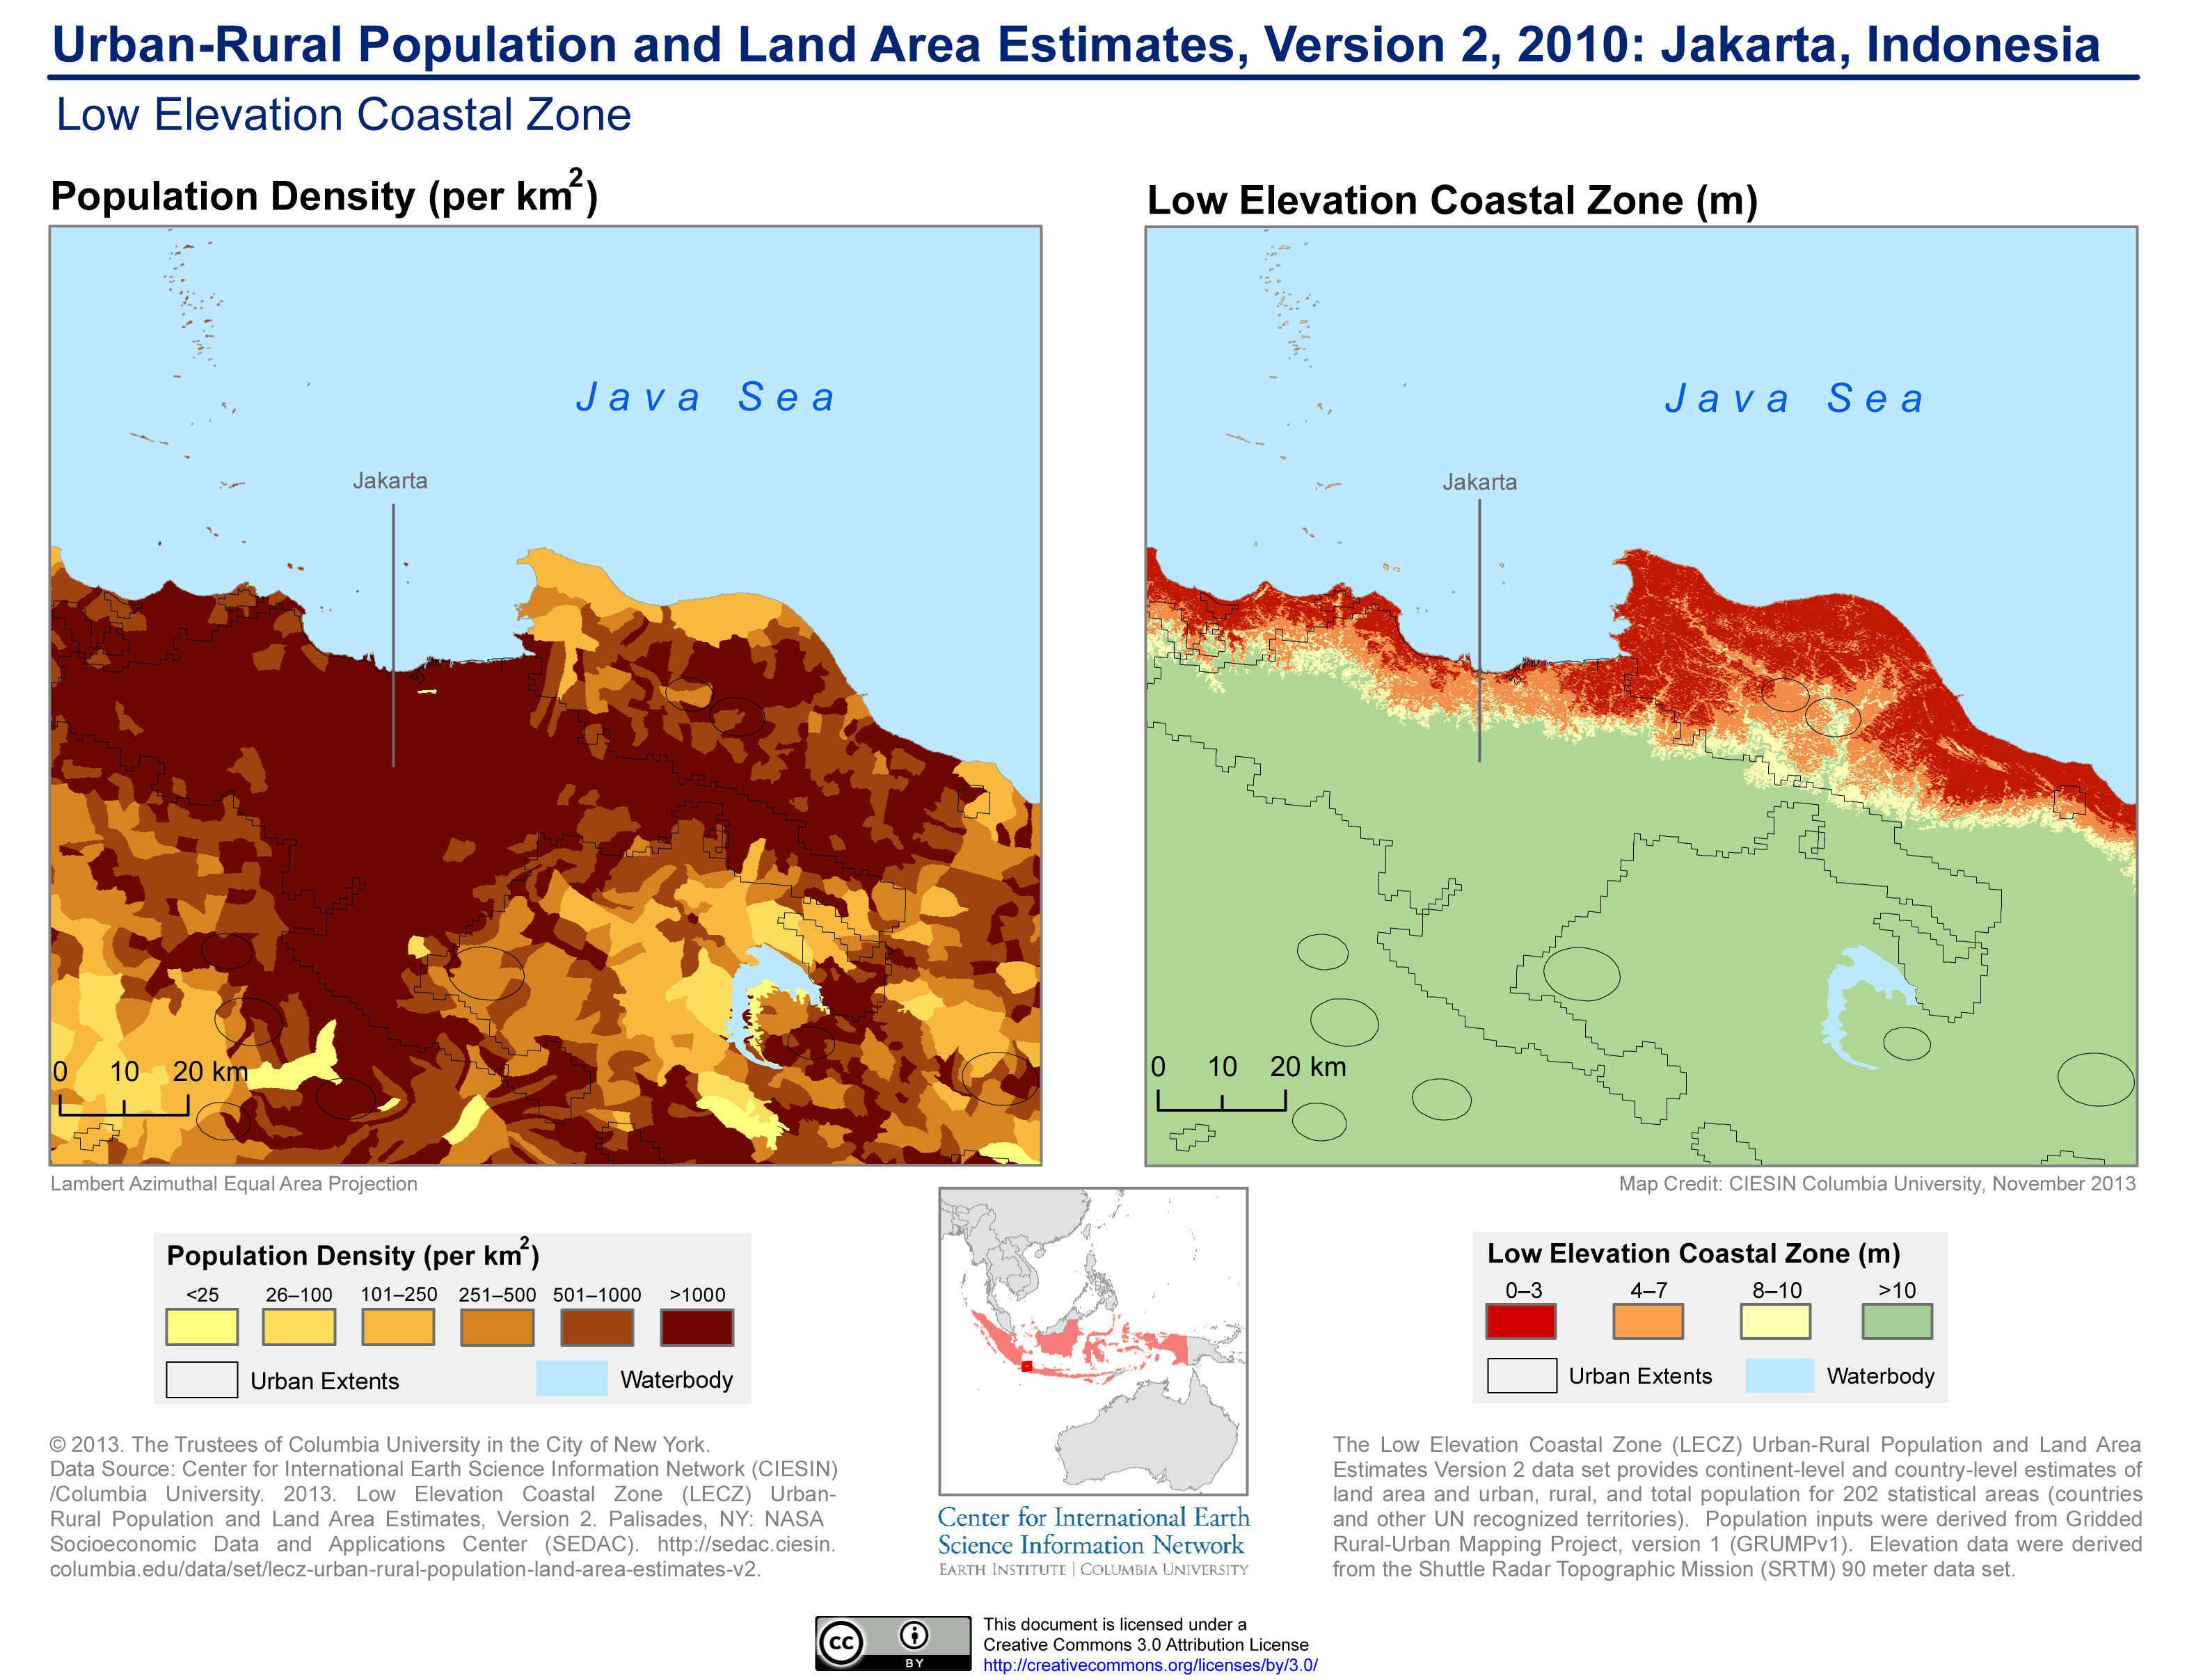 A comparison of Jakarta’s population density with Low Elevation Coastal Zone (LECZ) topography